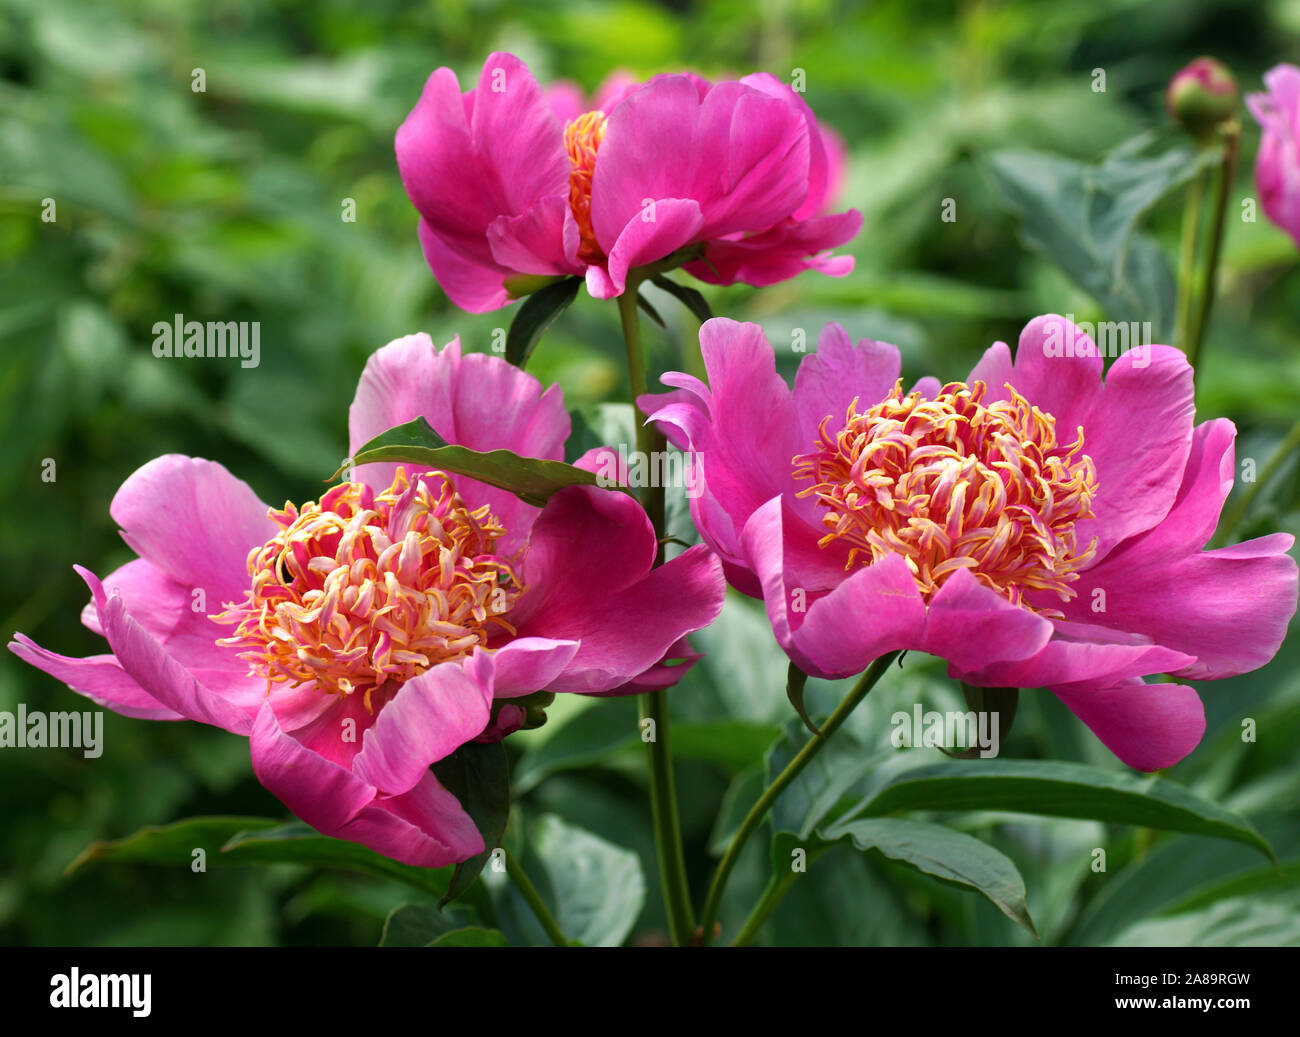 https://c8.alamy.com/comp/2A89RGW/peony-neon-japanese-pink-peony-flower-paeonia-lactiflora-chinese-peony-or-common-garden-peony-2A89RGW.jpg